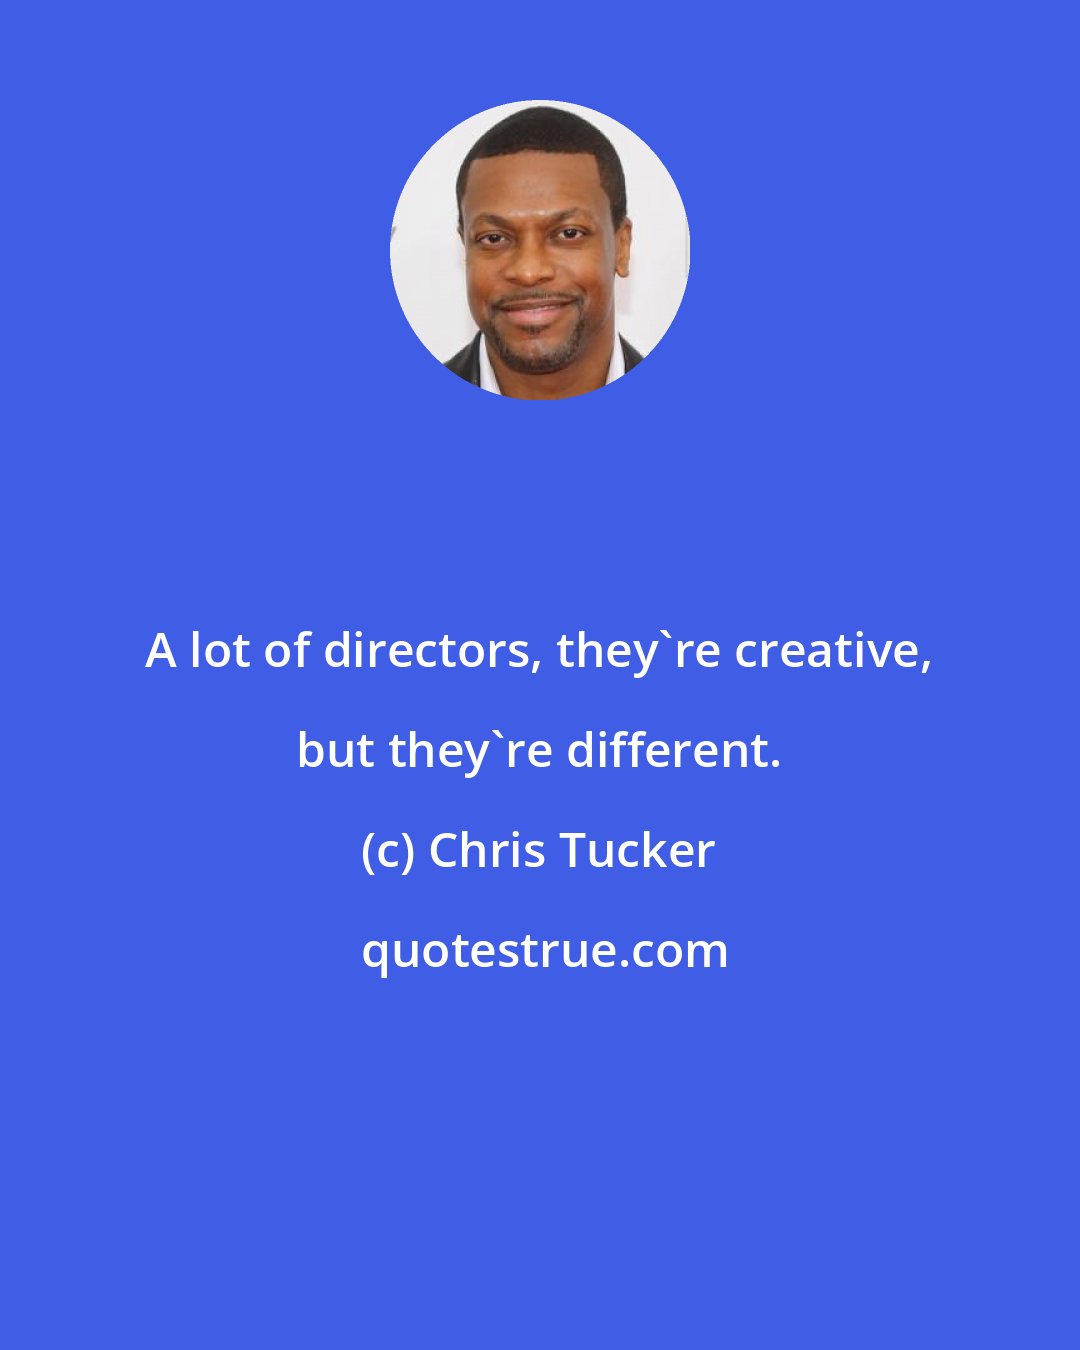 Chris Tucker: A lot of directors, they're creative, but they're different.